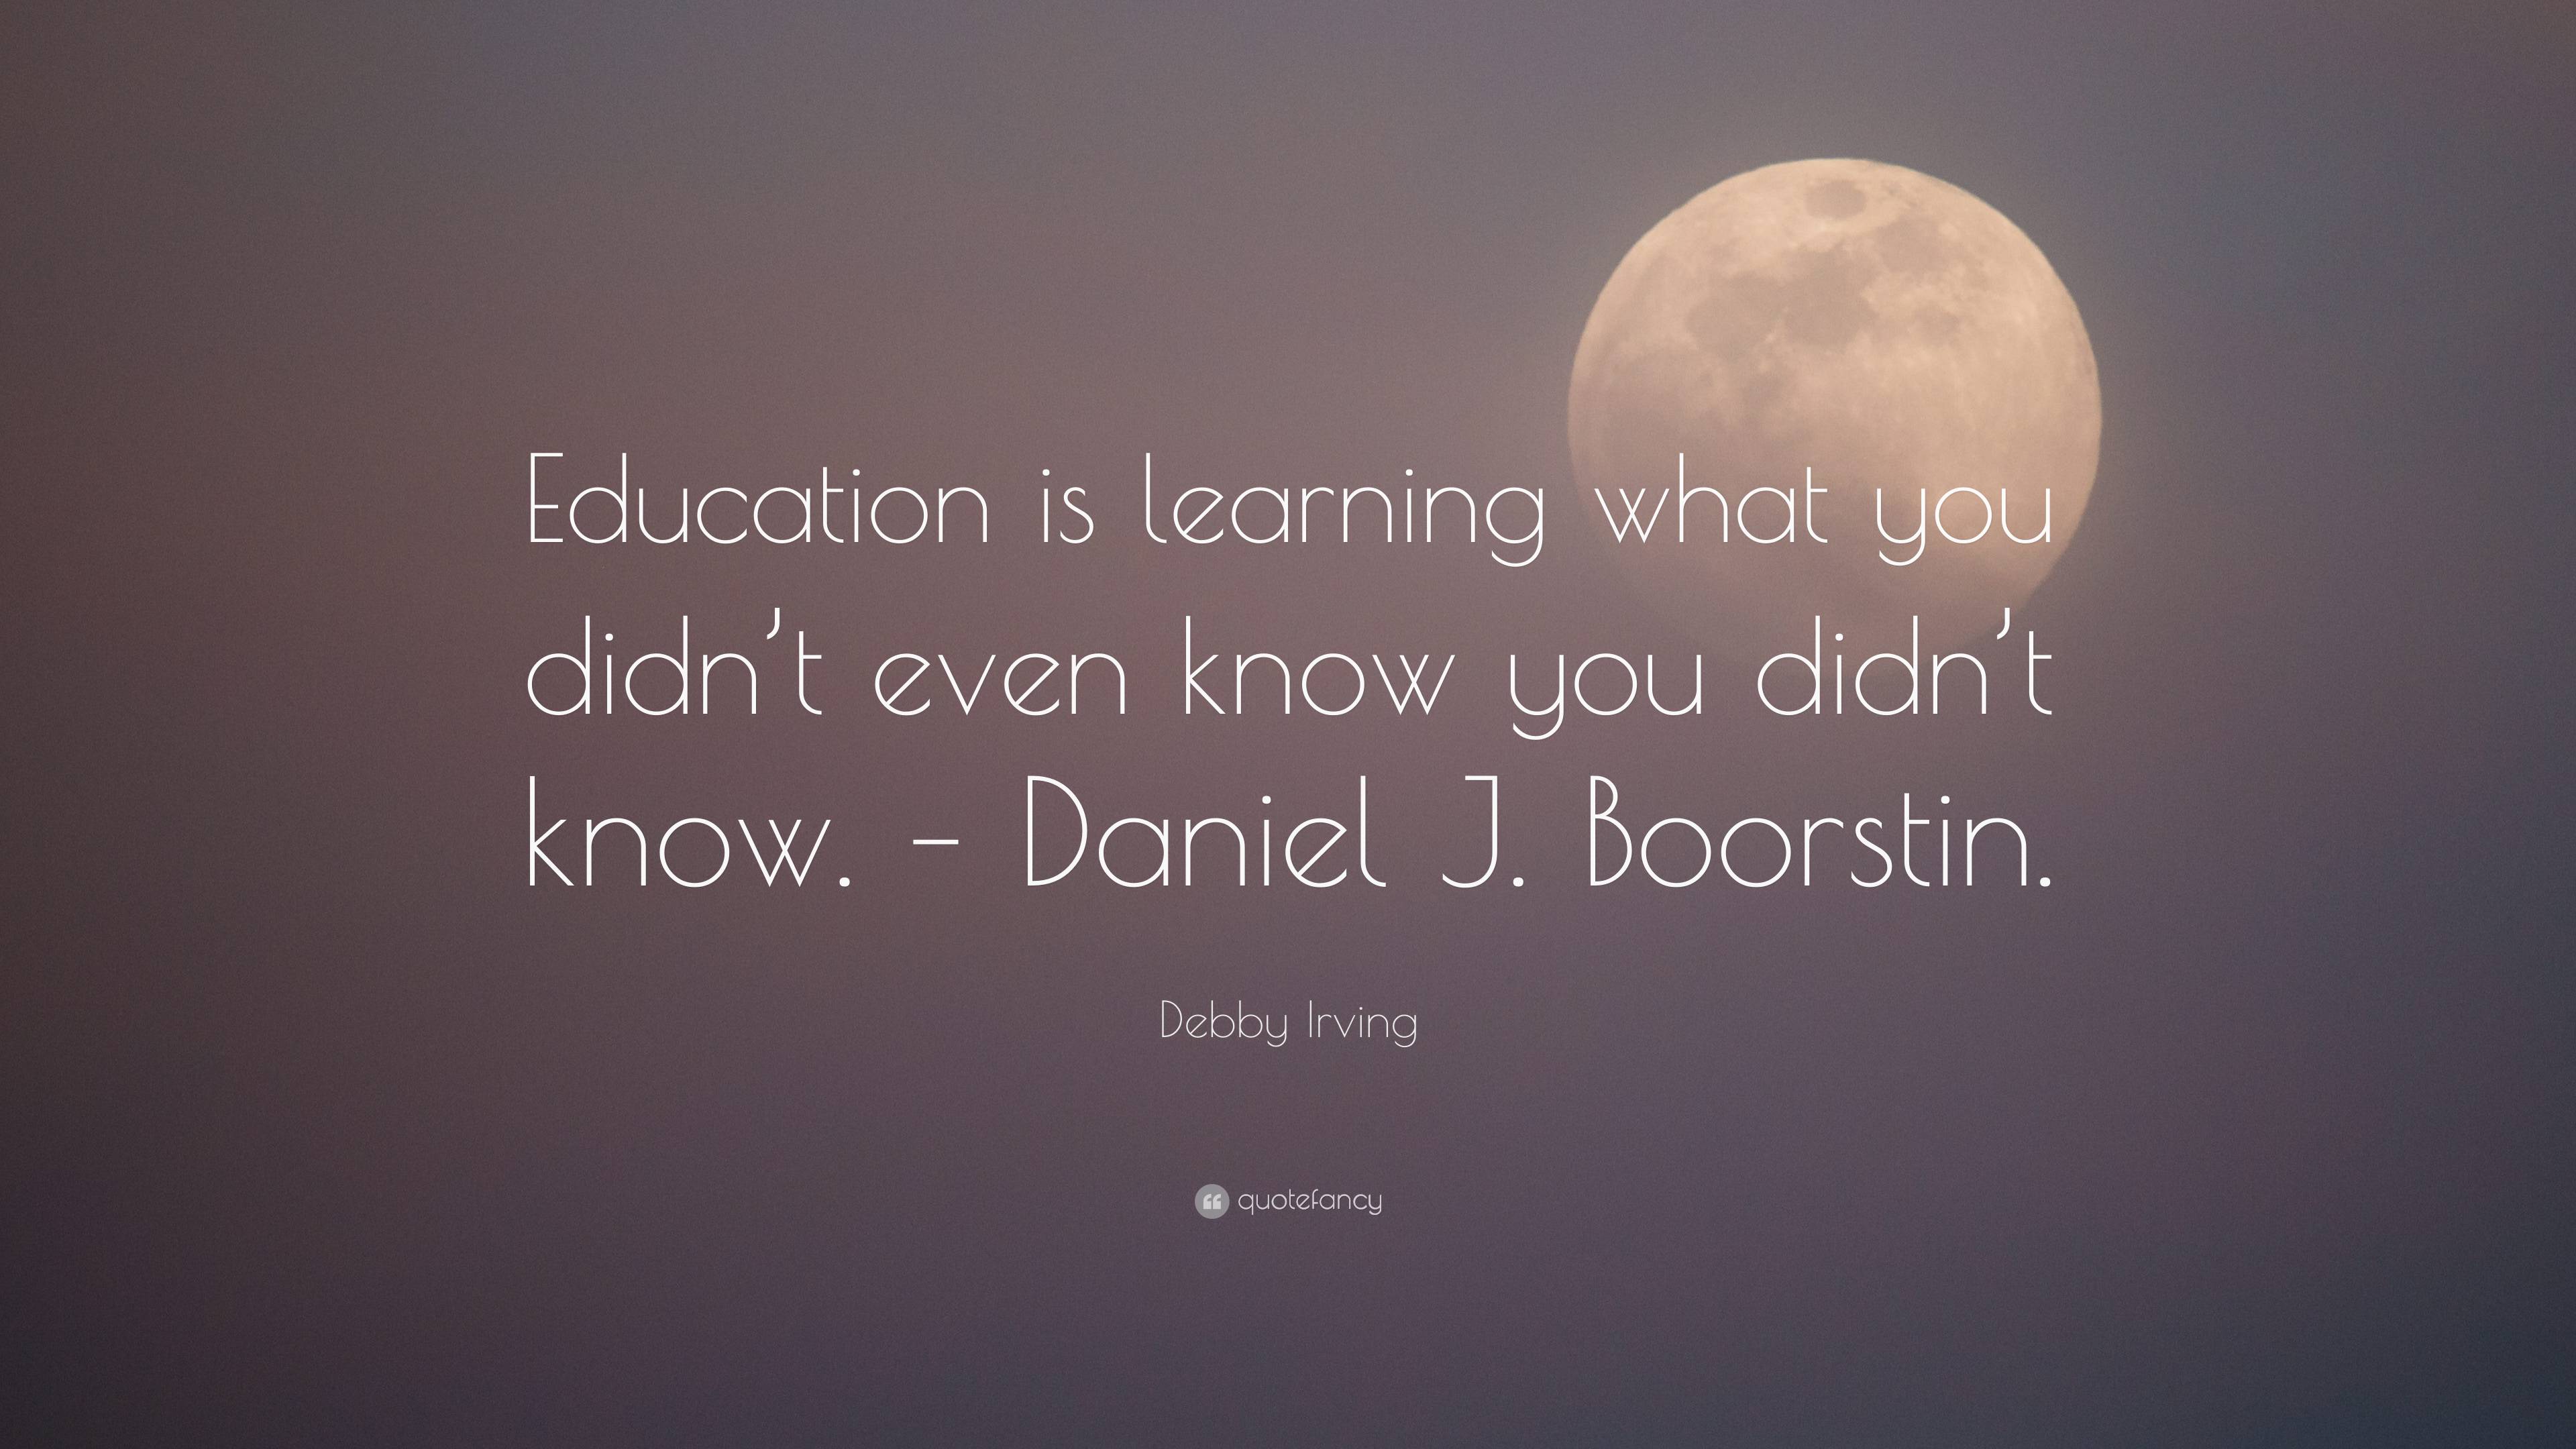 Debby Irving Quote: “Education is learning what you didn’t even know ...